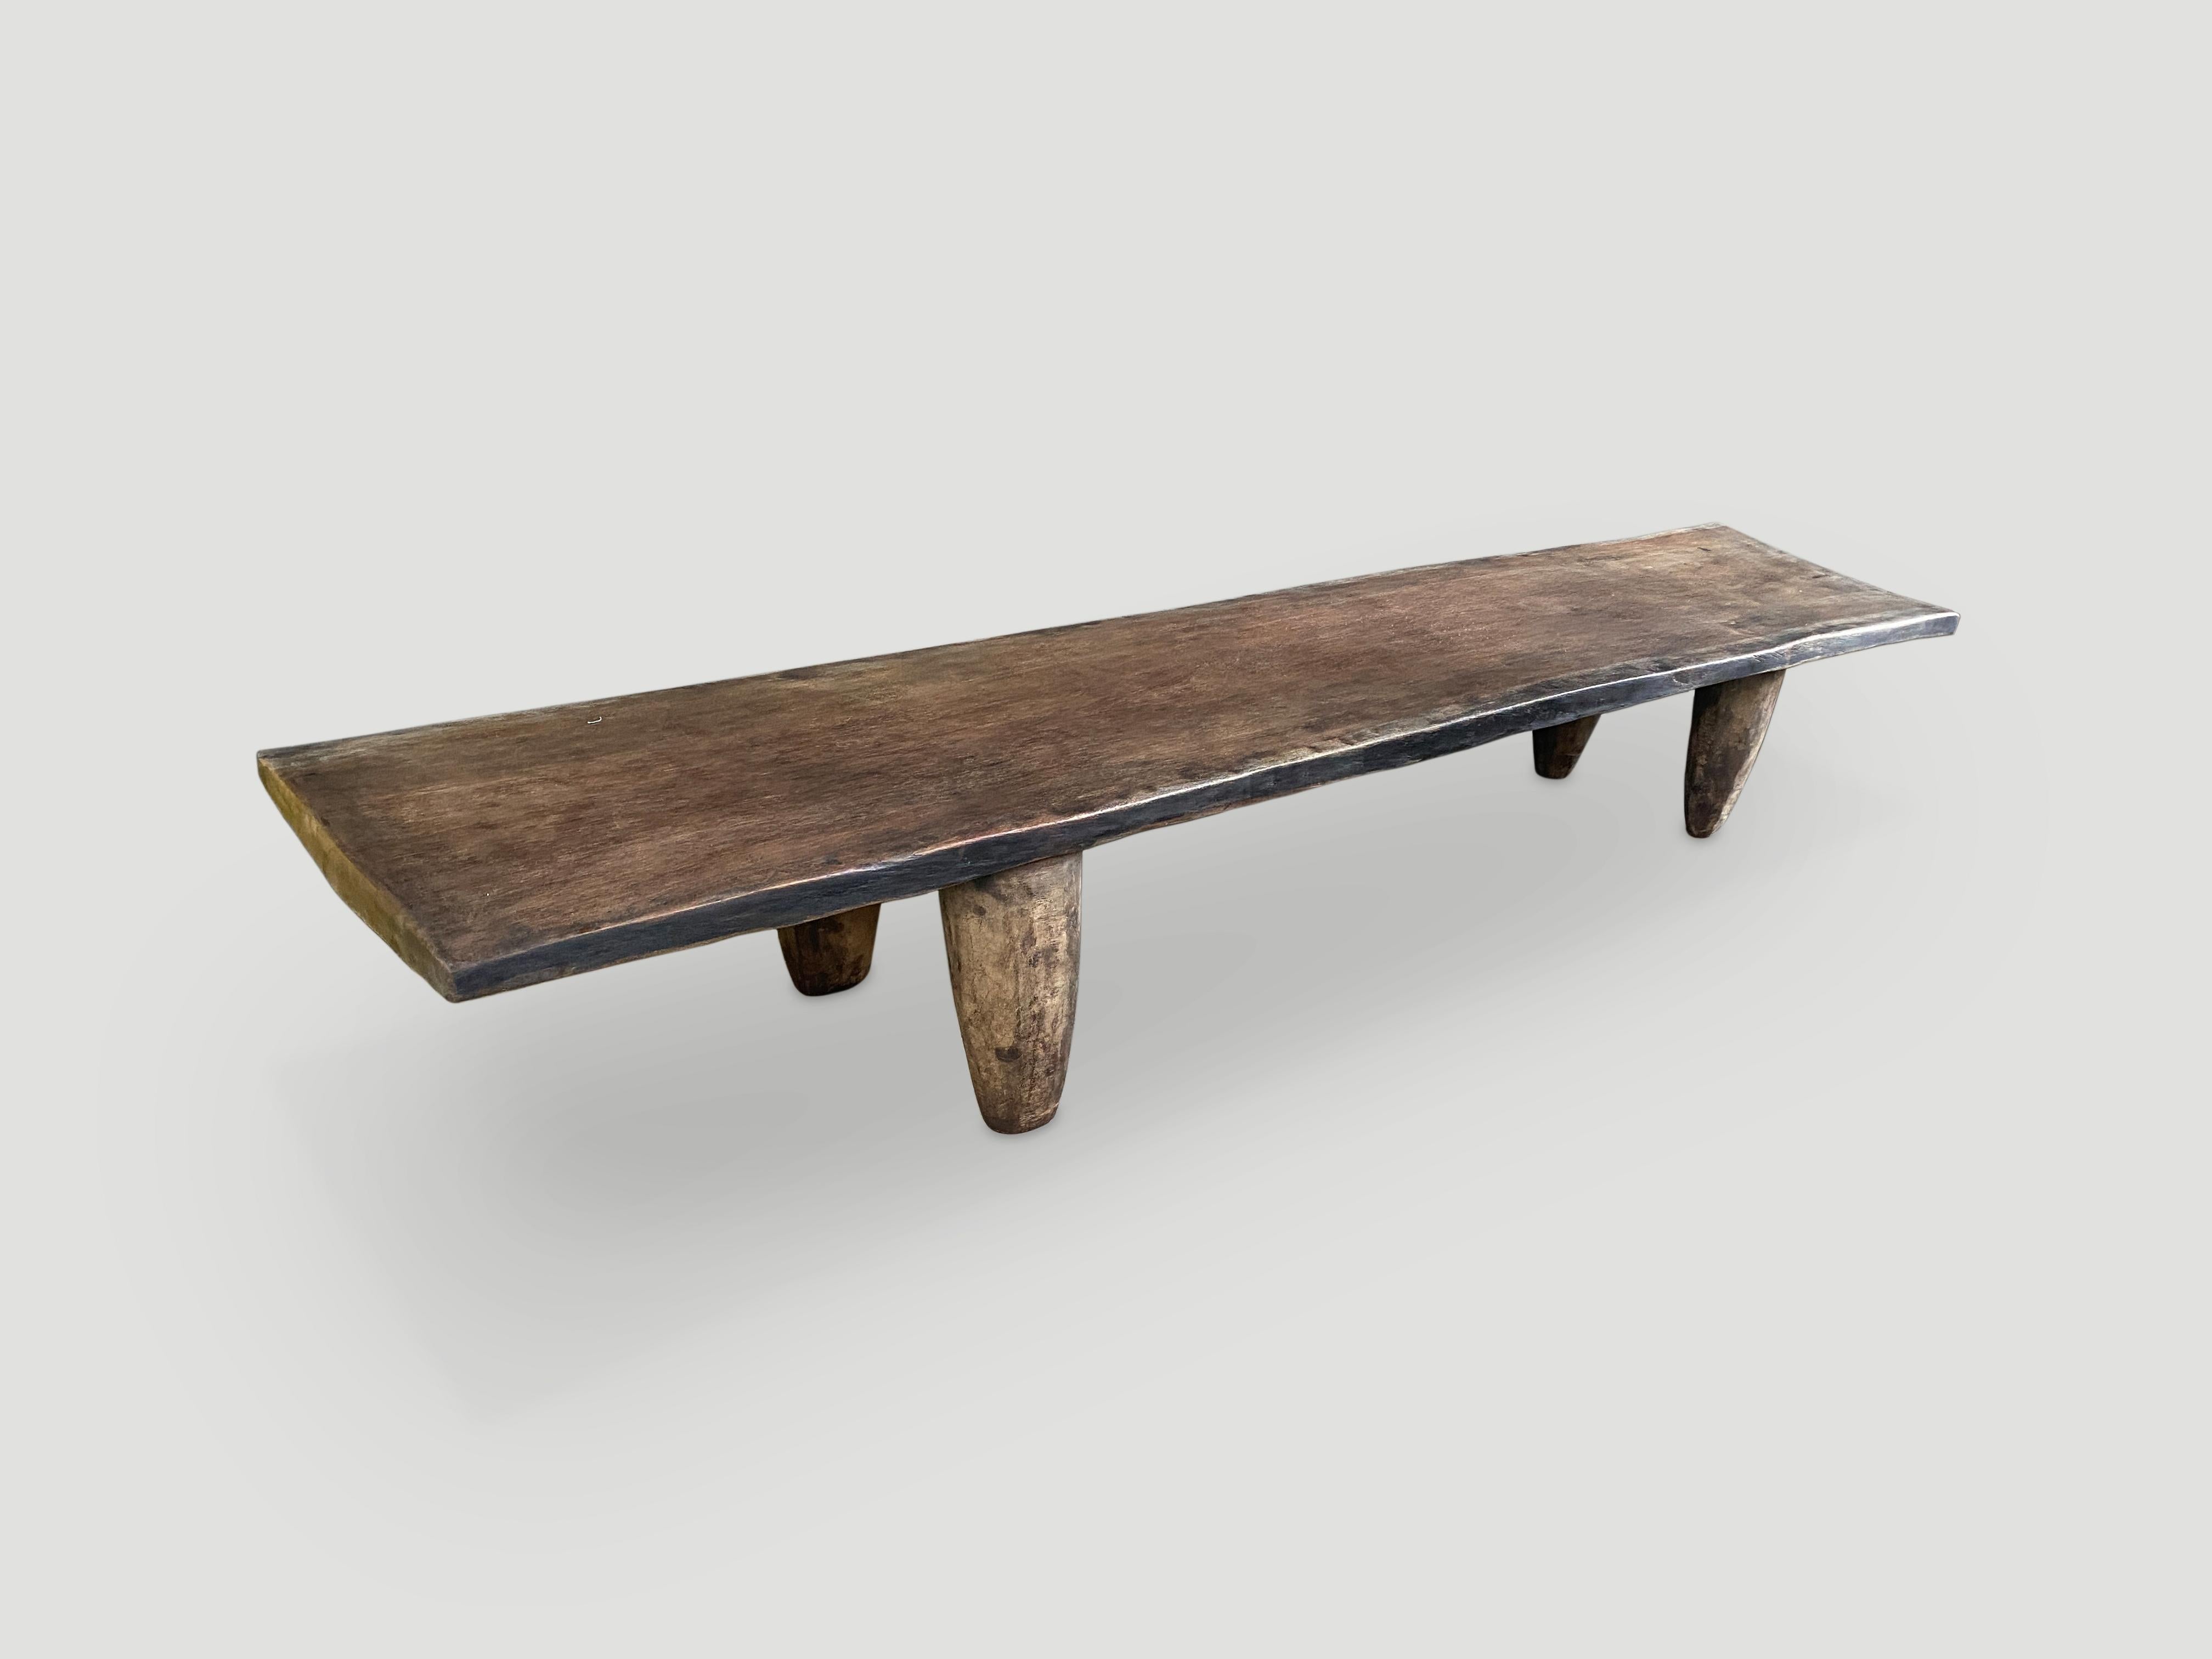 Rare antique coffee table hand carved by the Senufo tribes from a single block of Iroko wood, native to the west coast of Africa. The wood is tough, dense and very durable. Shown with hand carved cone style legs. We only source the best. This one is